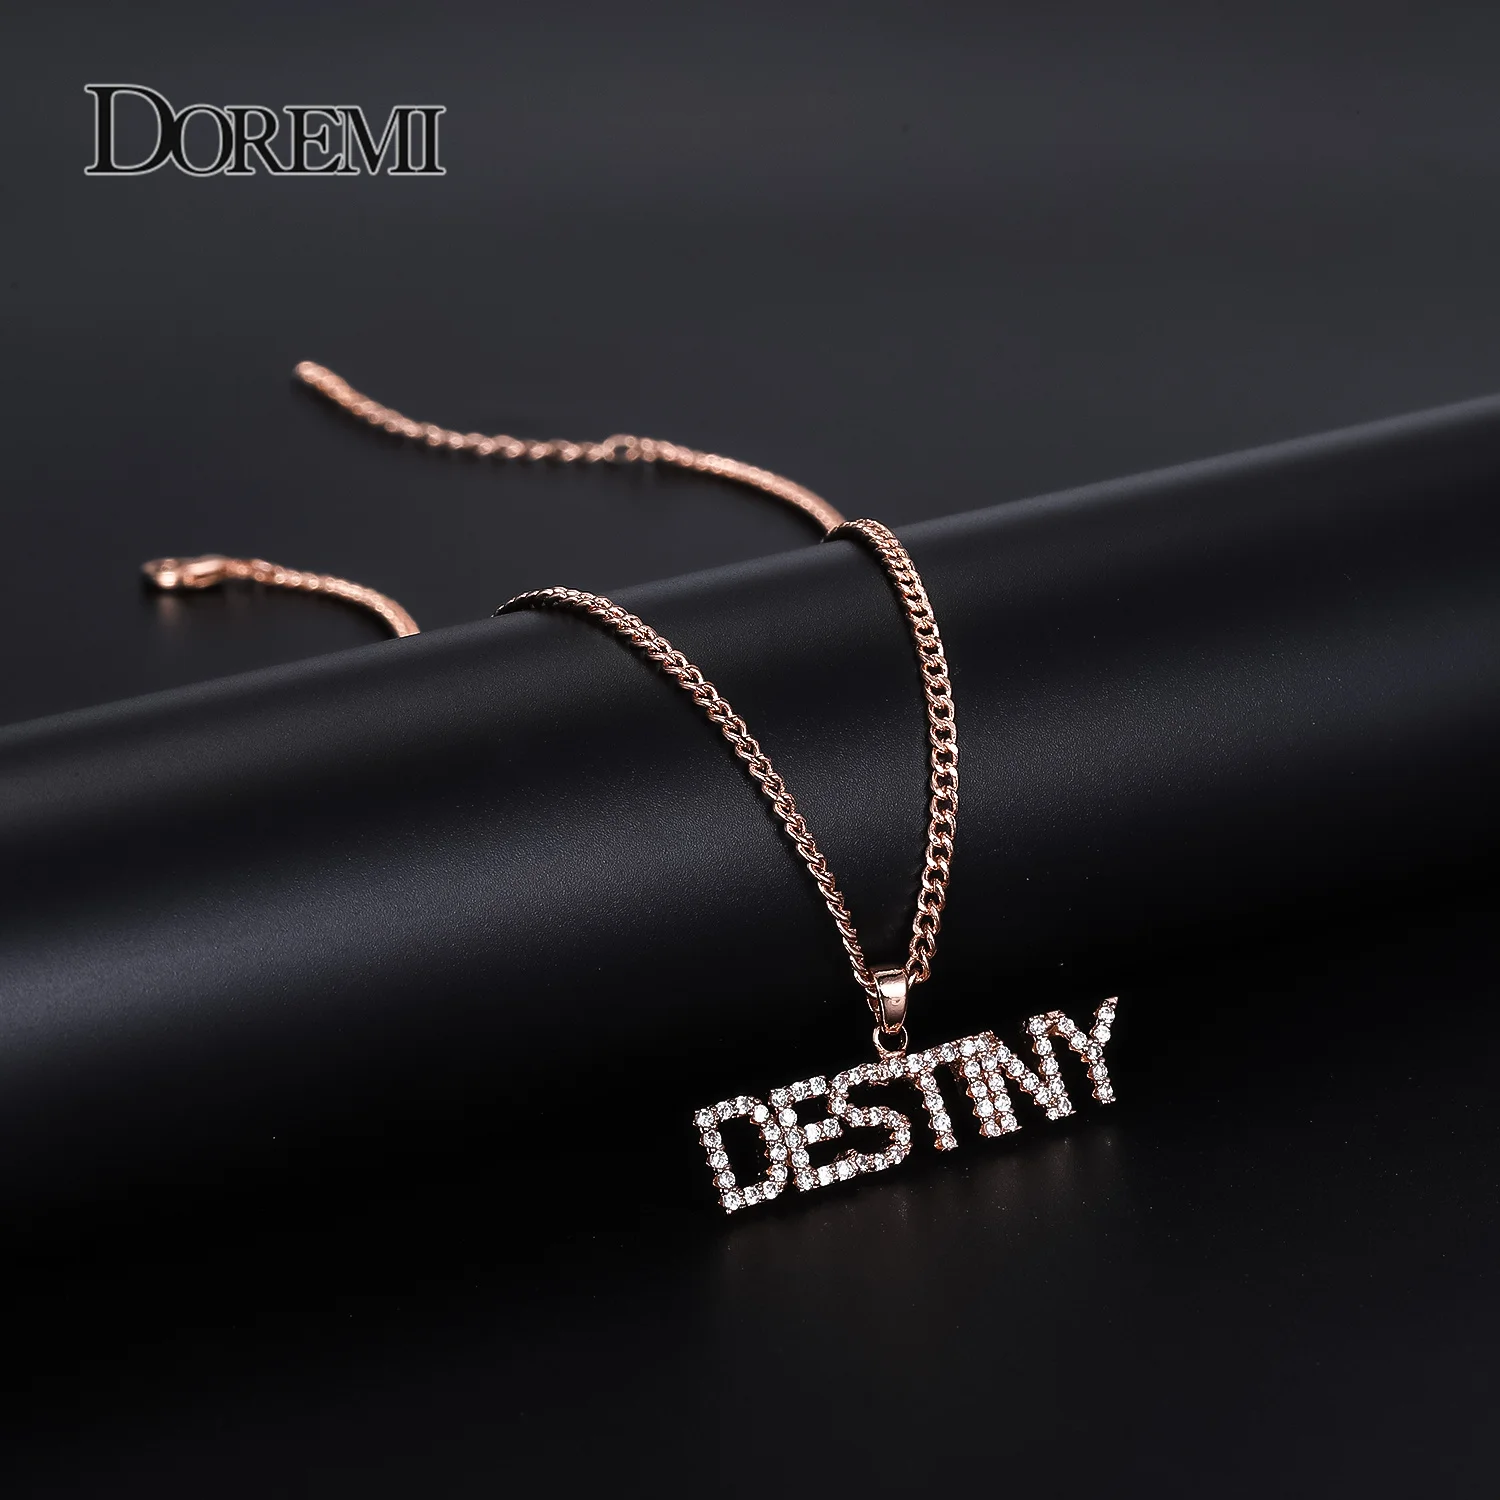 DOREMI 3A Zircon Personalized Custom Name Necklace for Women Men Pendant Stone Chain Zirconia Necklace With 4mm Cuban Chain